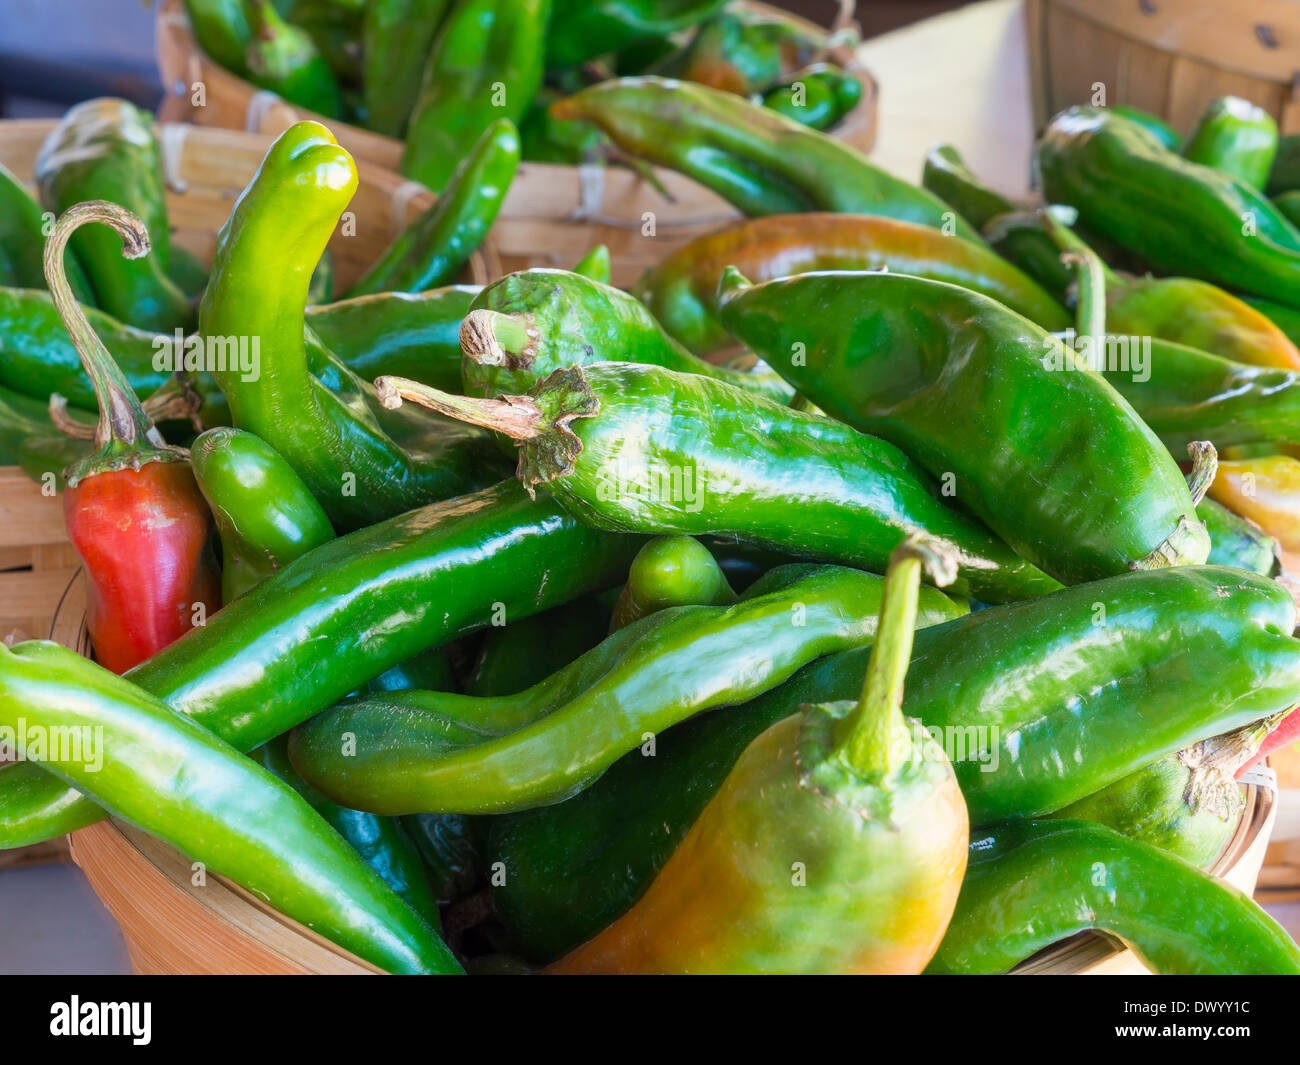 Fresh green and red chili peppers on a market stall in New Mexico, USA. Stock Photo